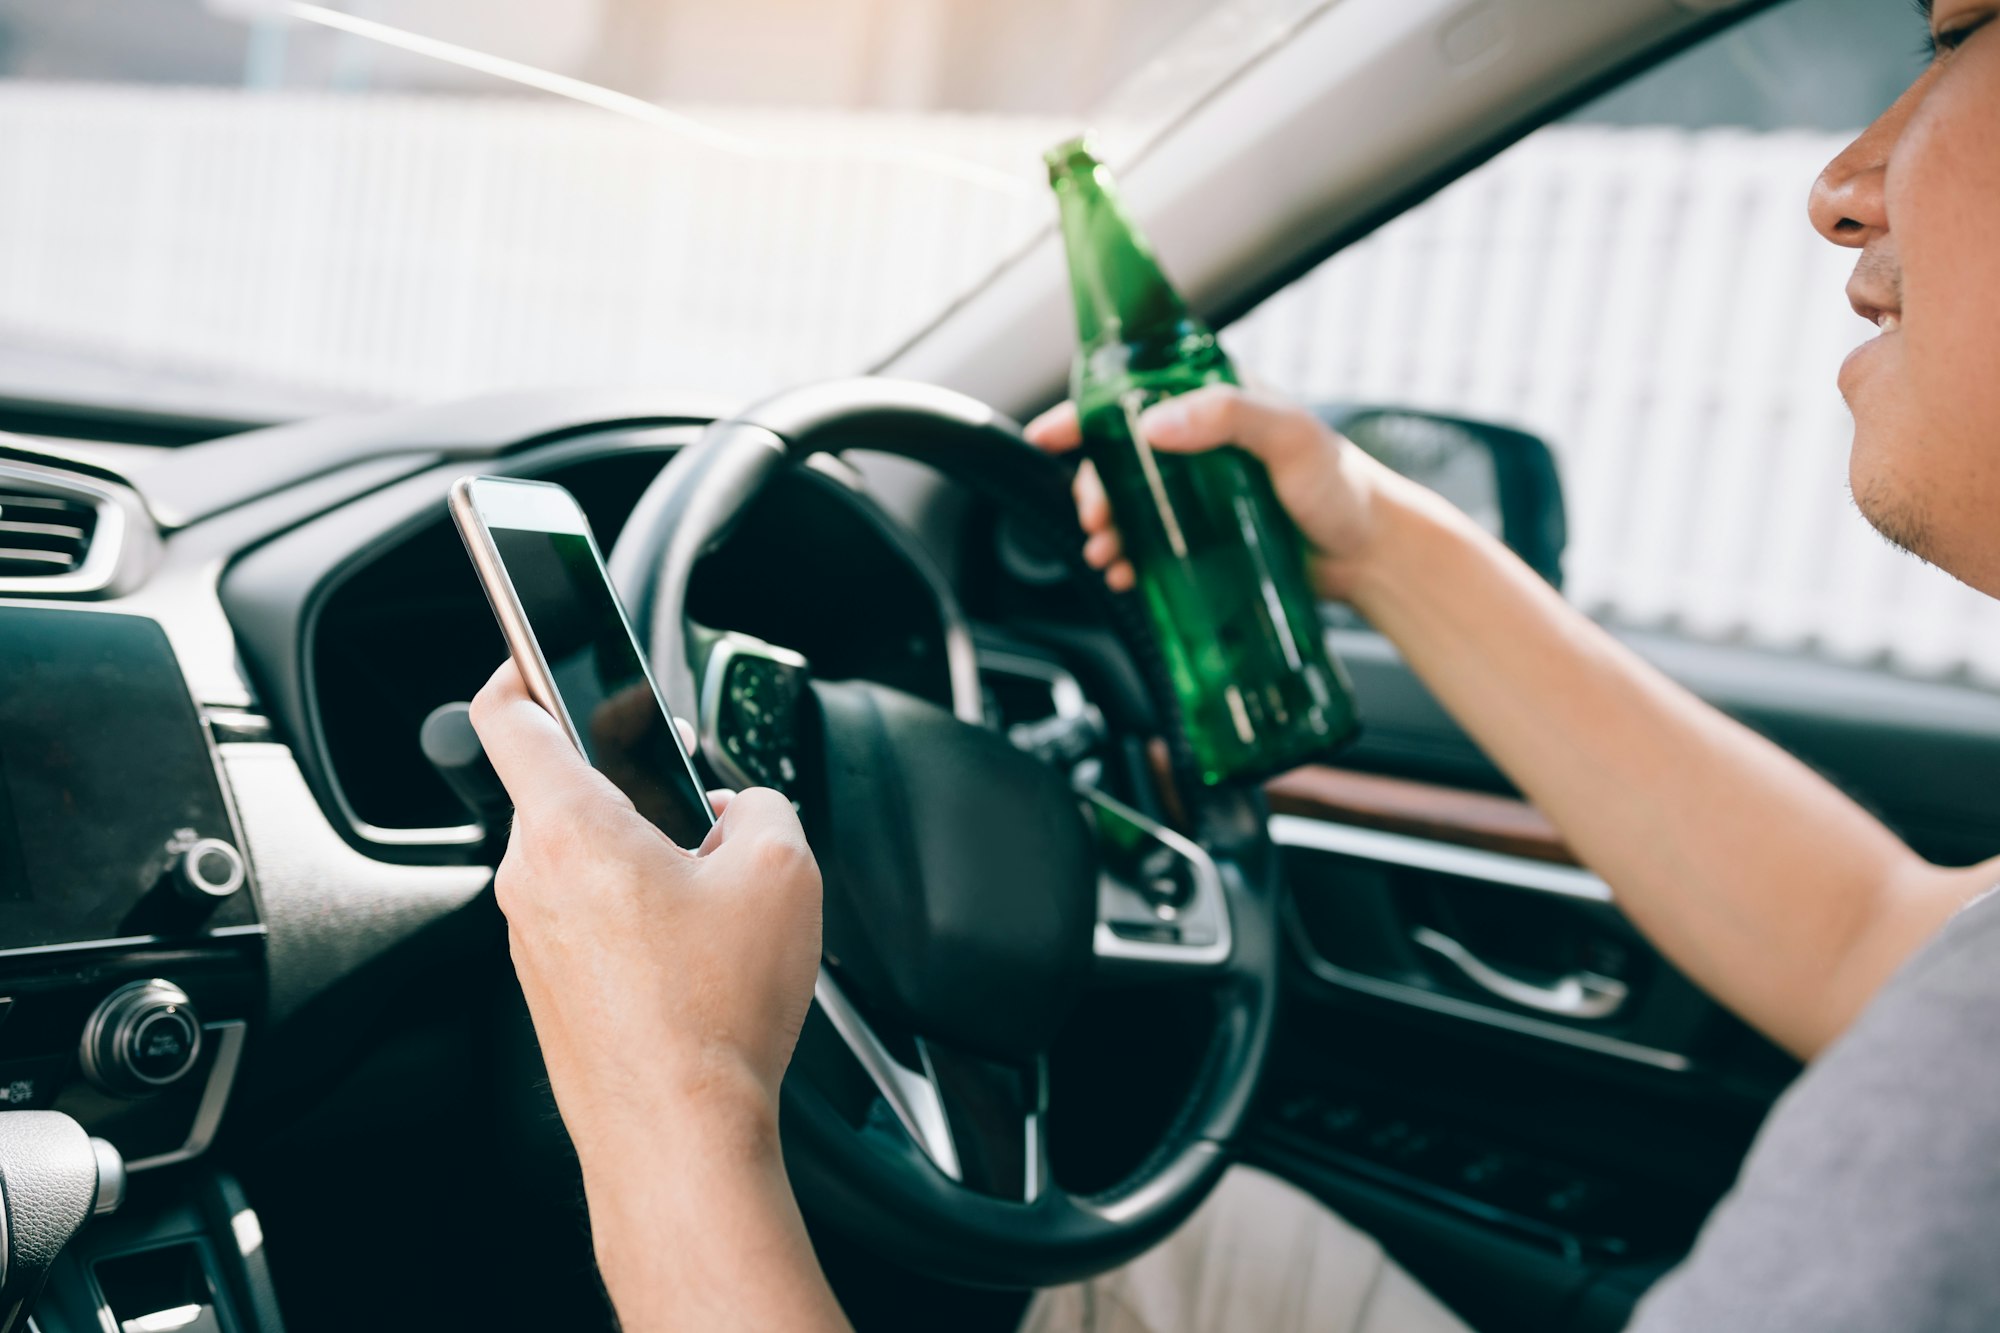 Asian men drink alcohol in the car and using mobile phones while driving.